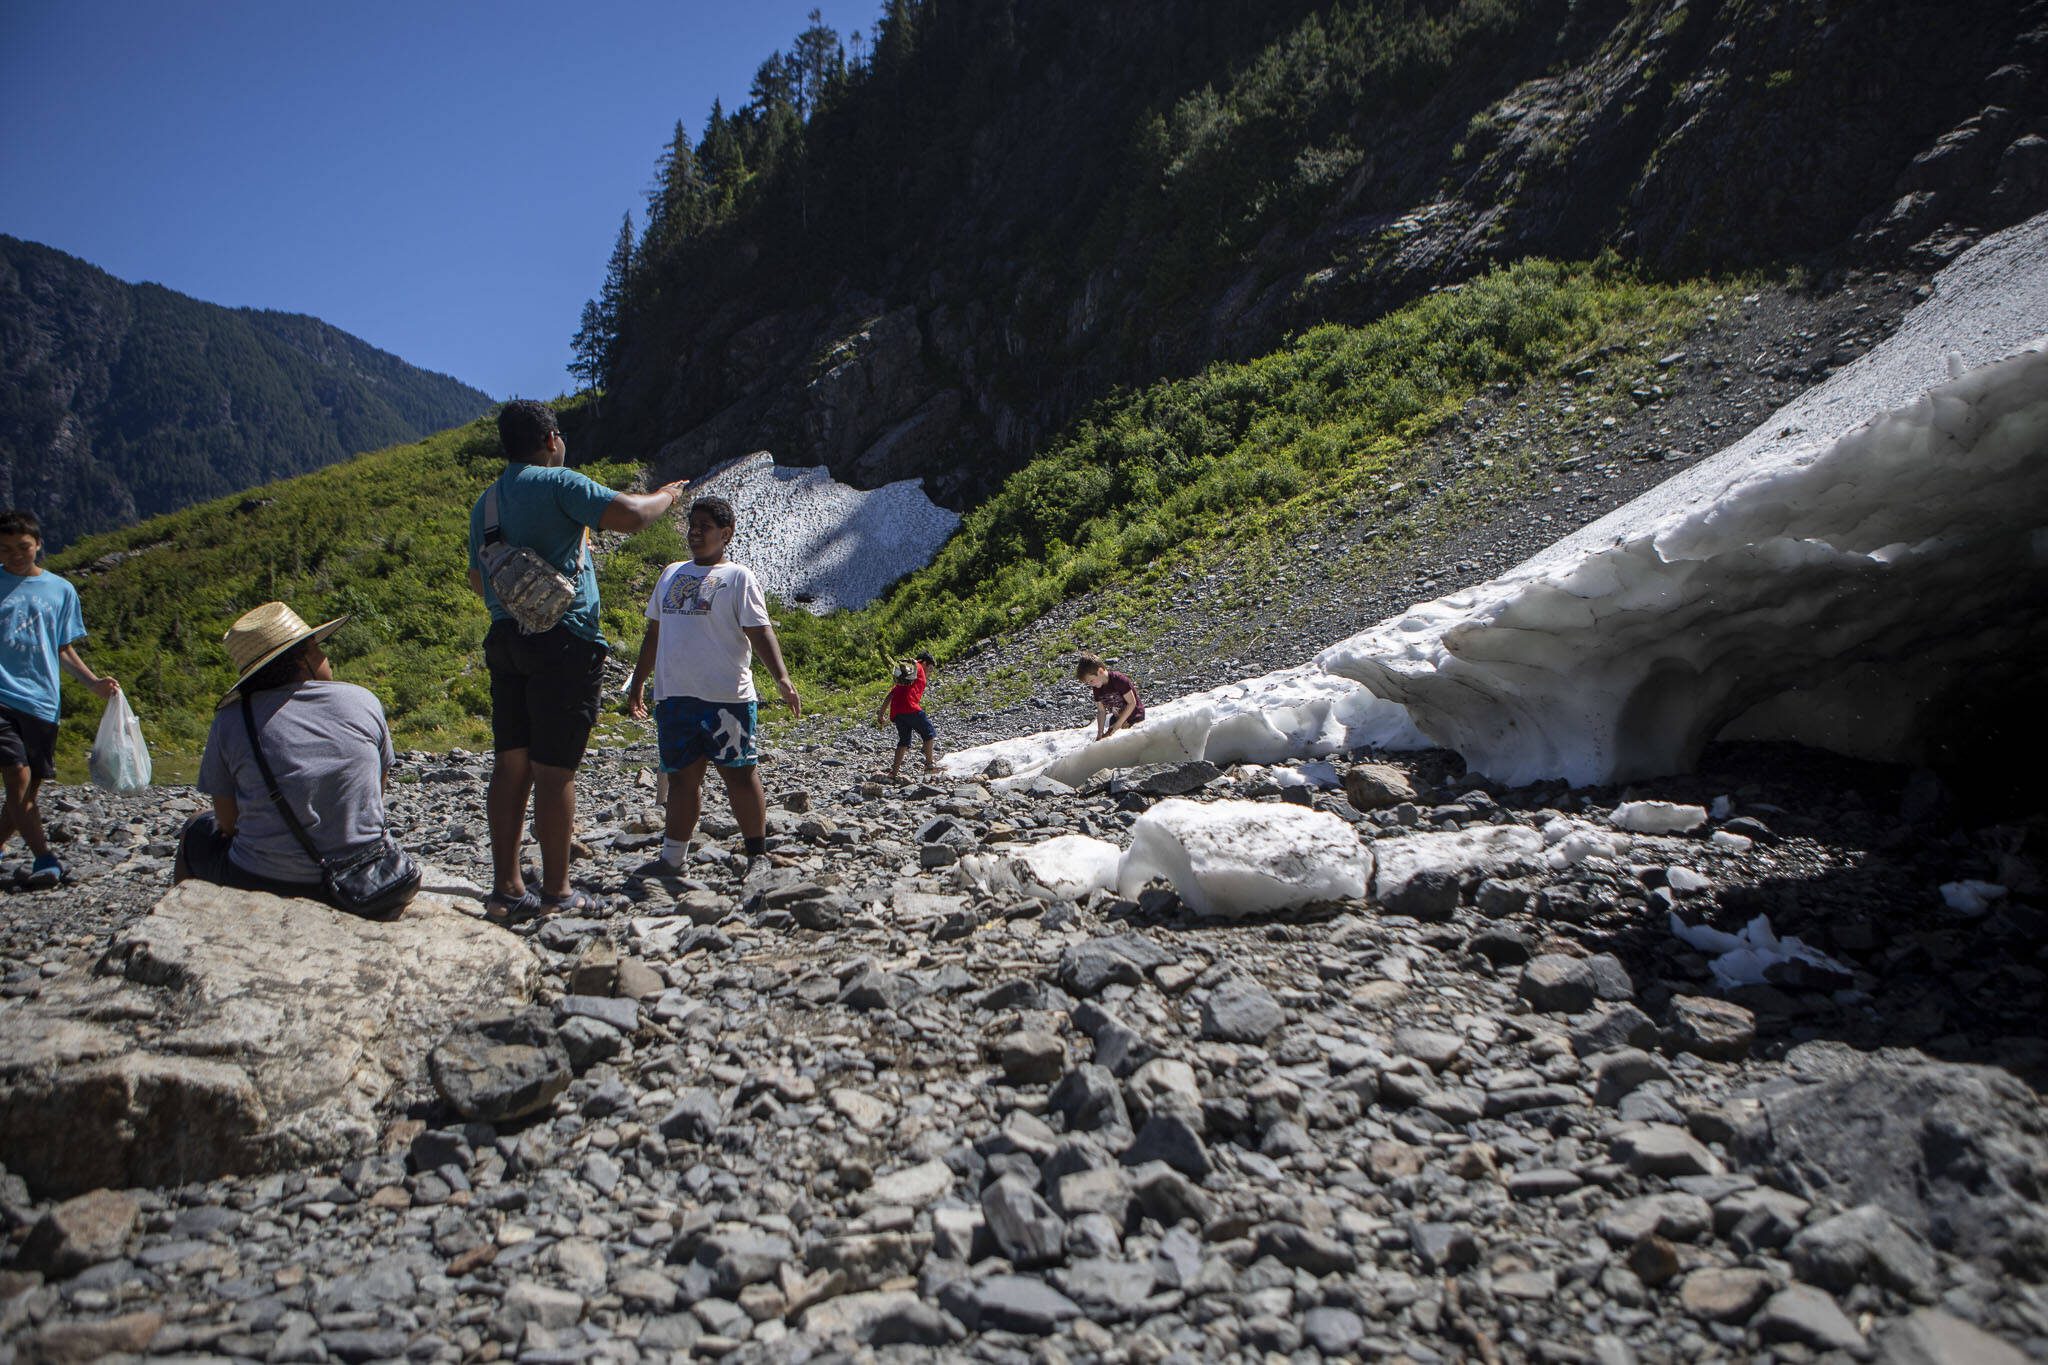 People explore at the Big Four Ice Caves along the Mountain Loop Highway in Snohomish County, Washington on Wednesday, July 19, 2023. (Annie Barker / The Herald)